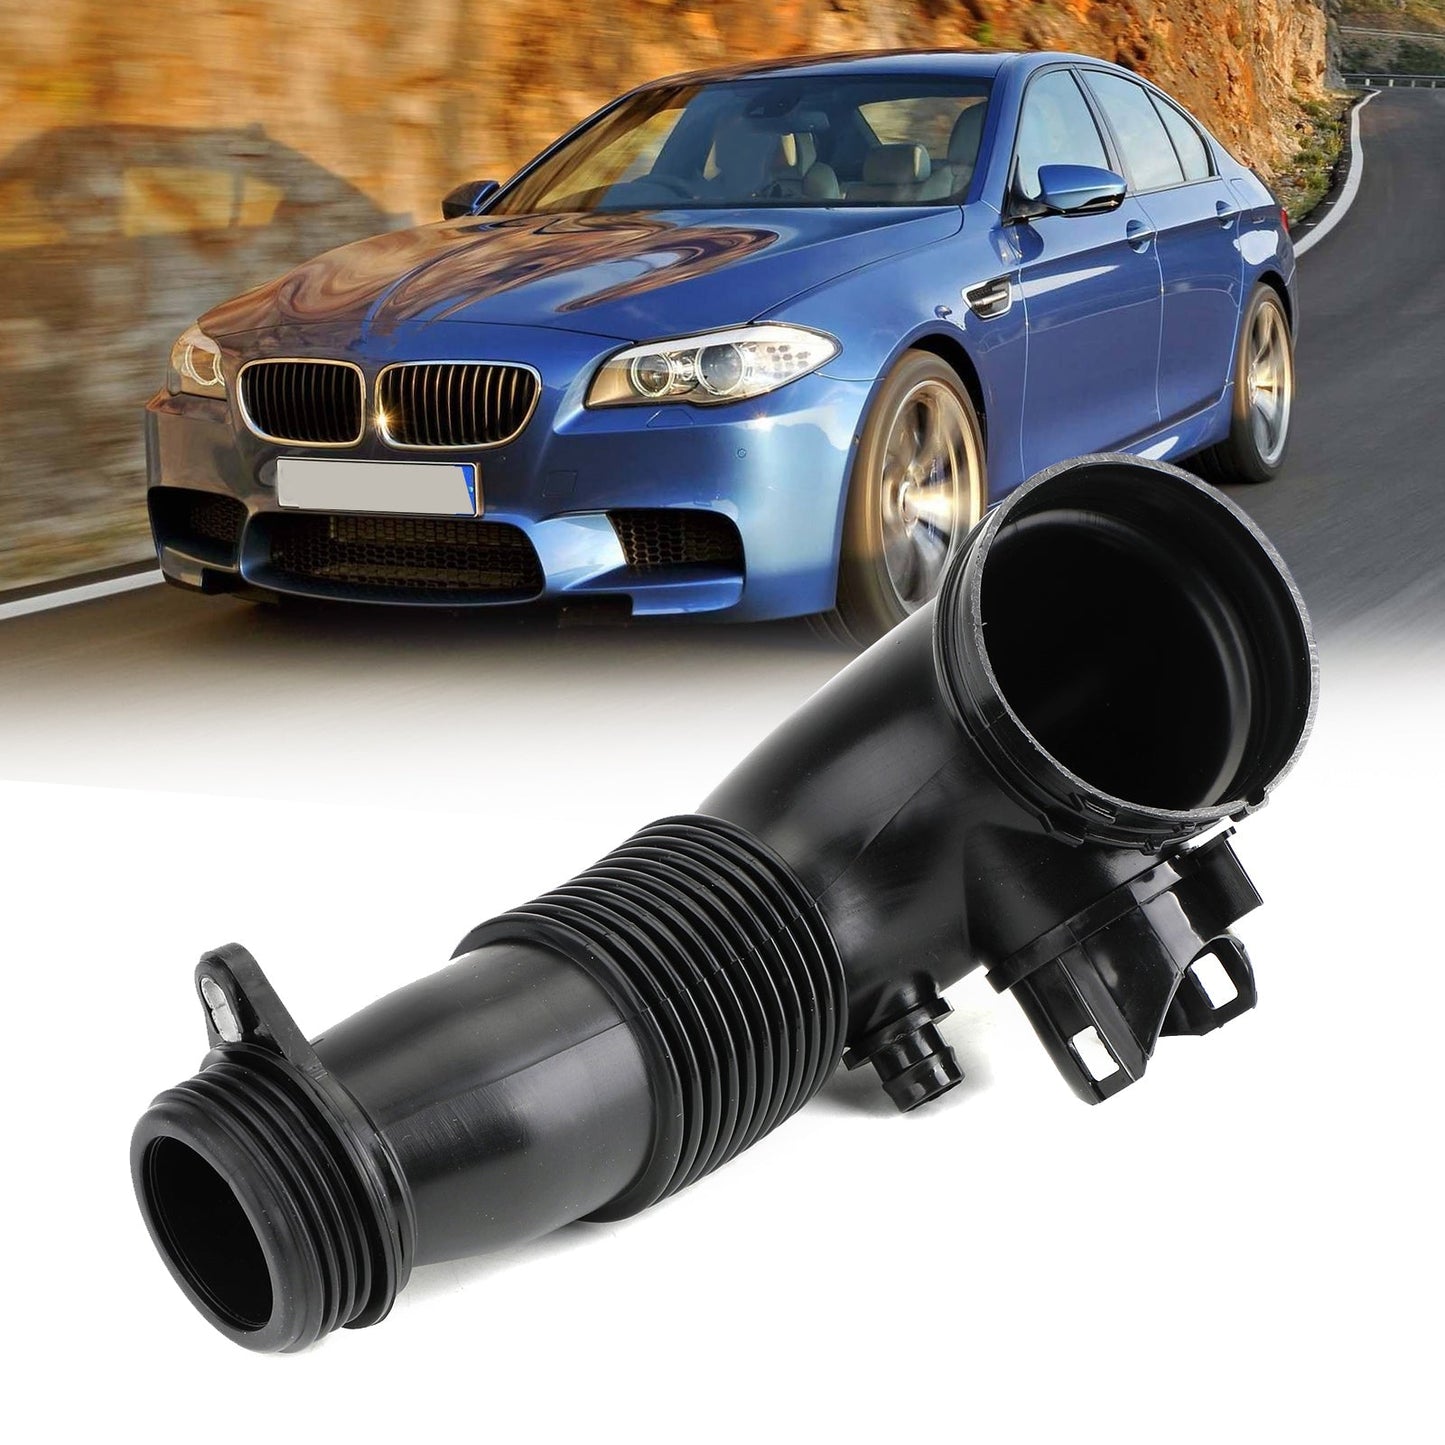 Turbo charger Intercooler-Air Inlet Tube Air Intake Hose Fit For BMW 228i 320i 328i 428i 528 BLK